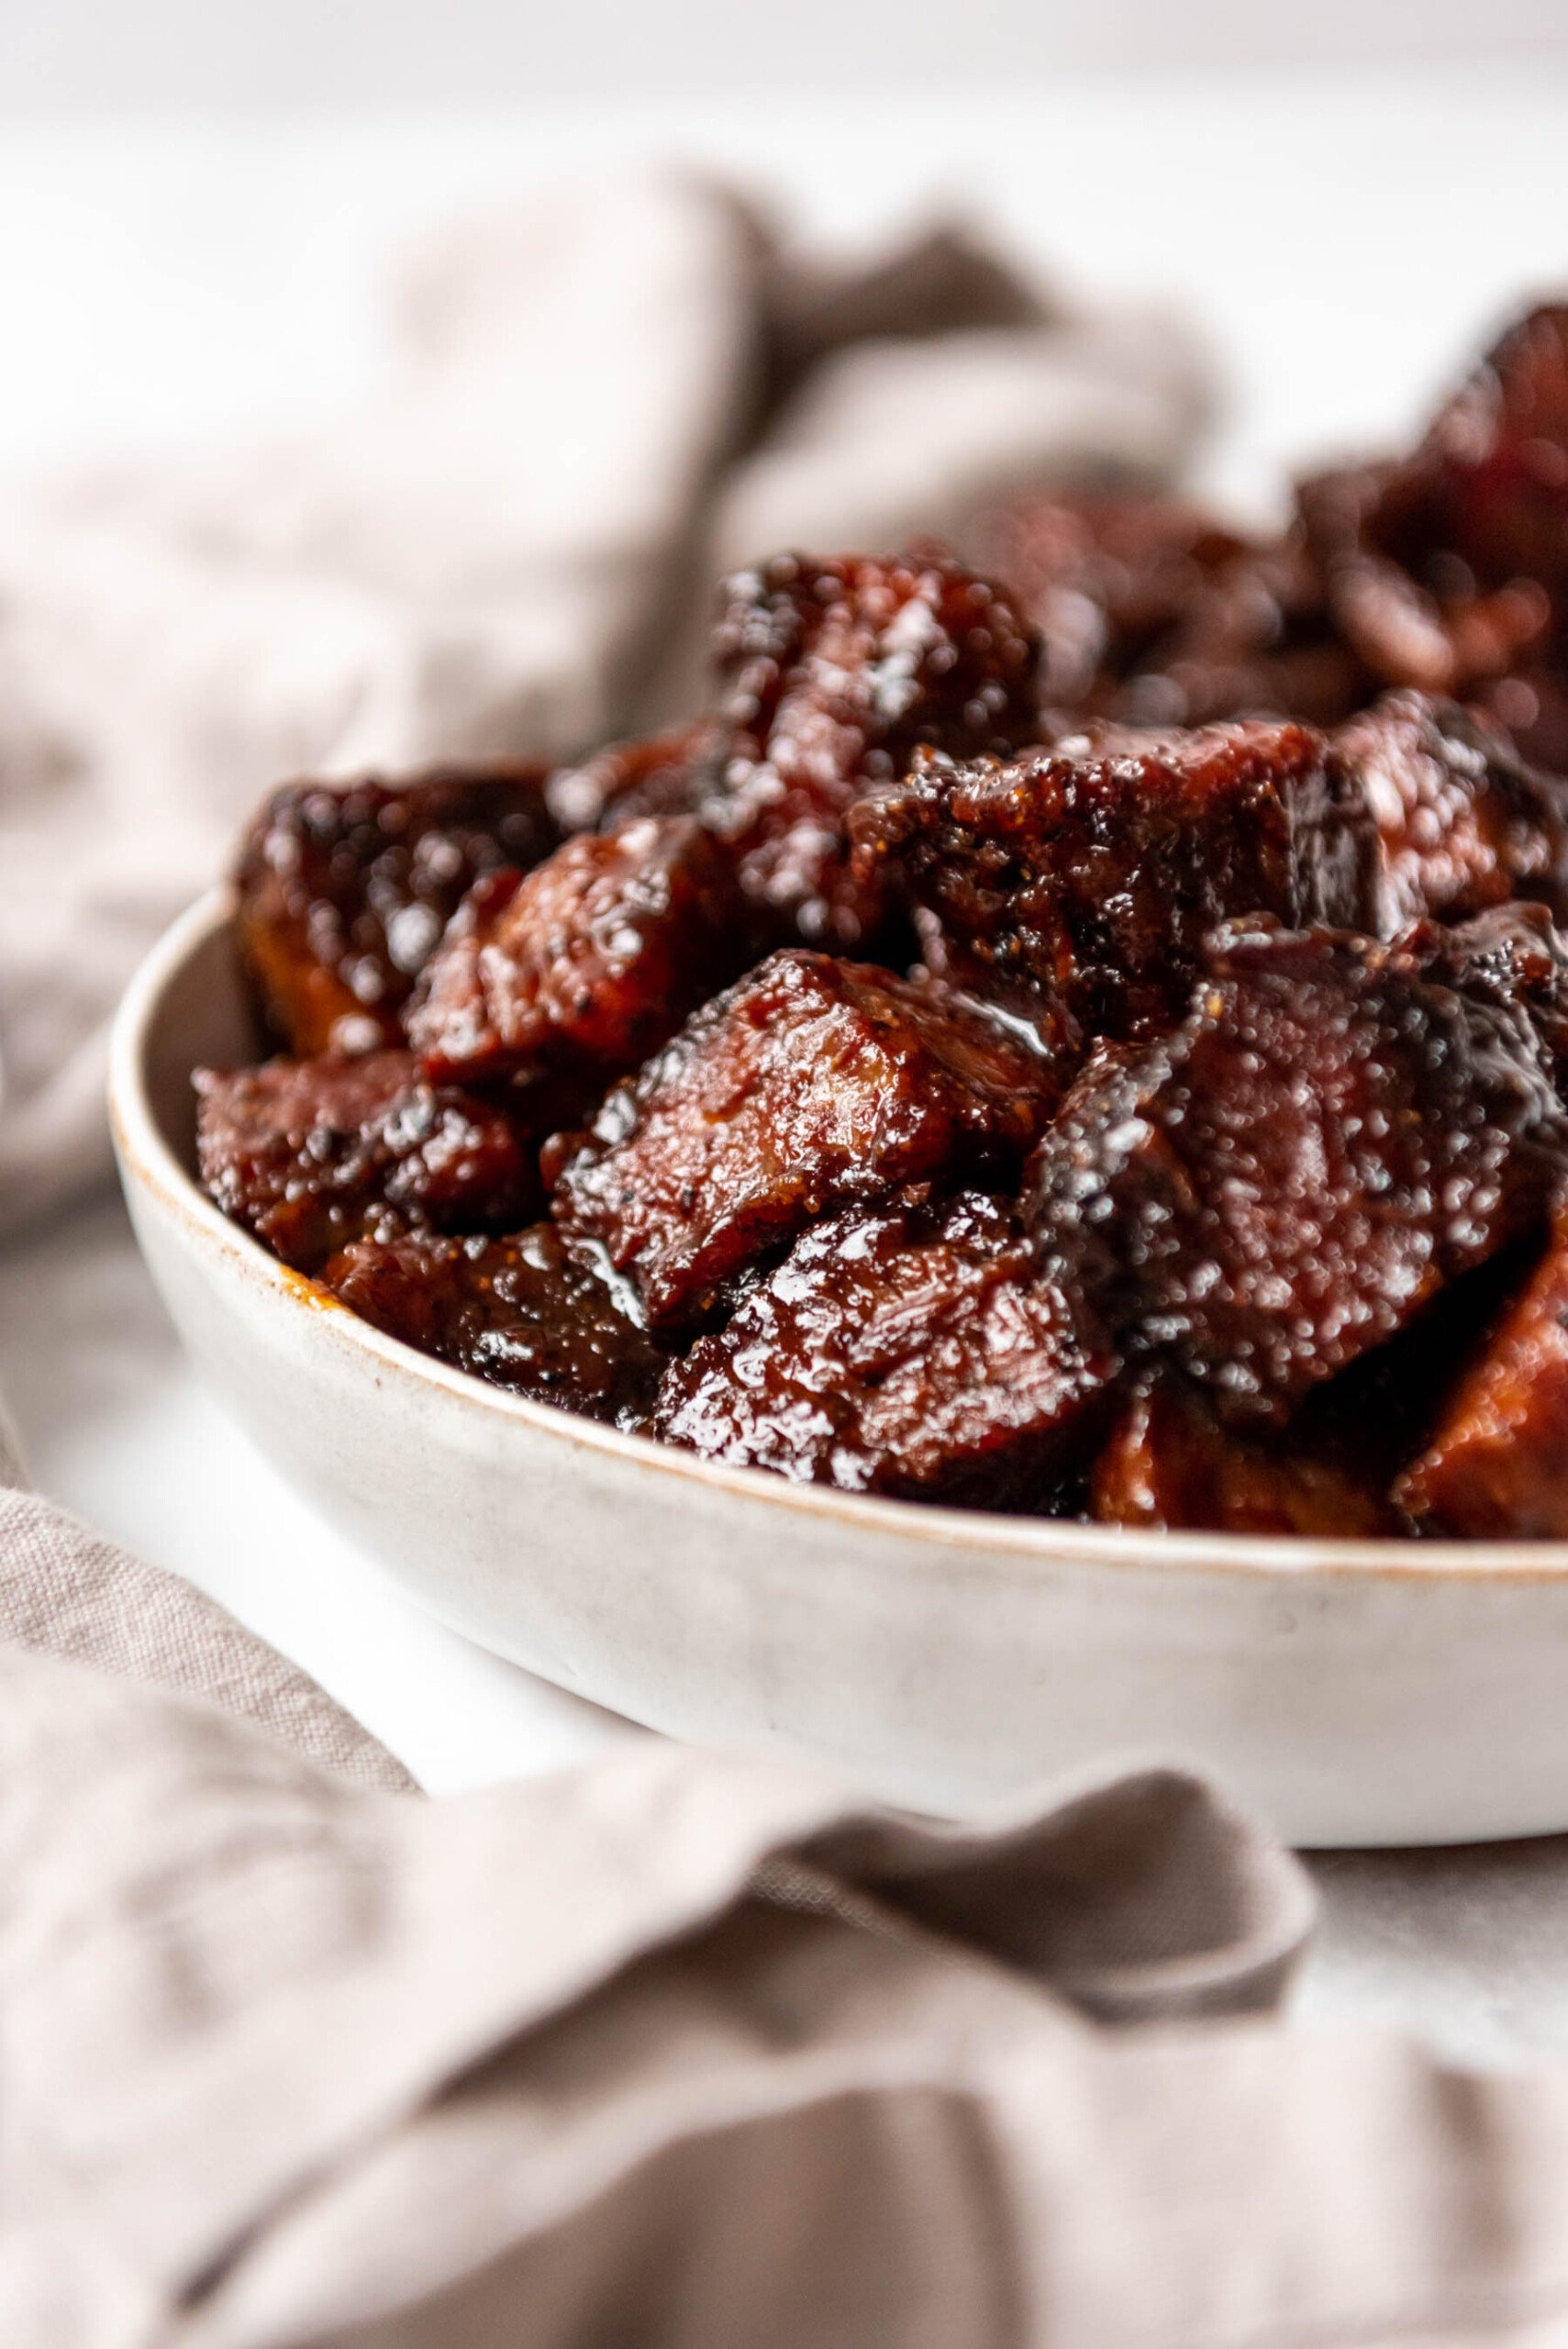 Beef brisket burnt ends piled in a bowl next to a cloth napkin.